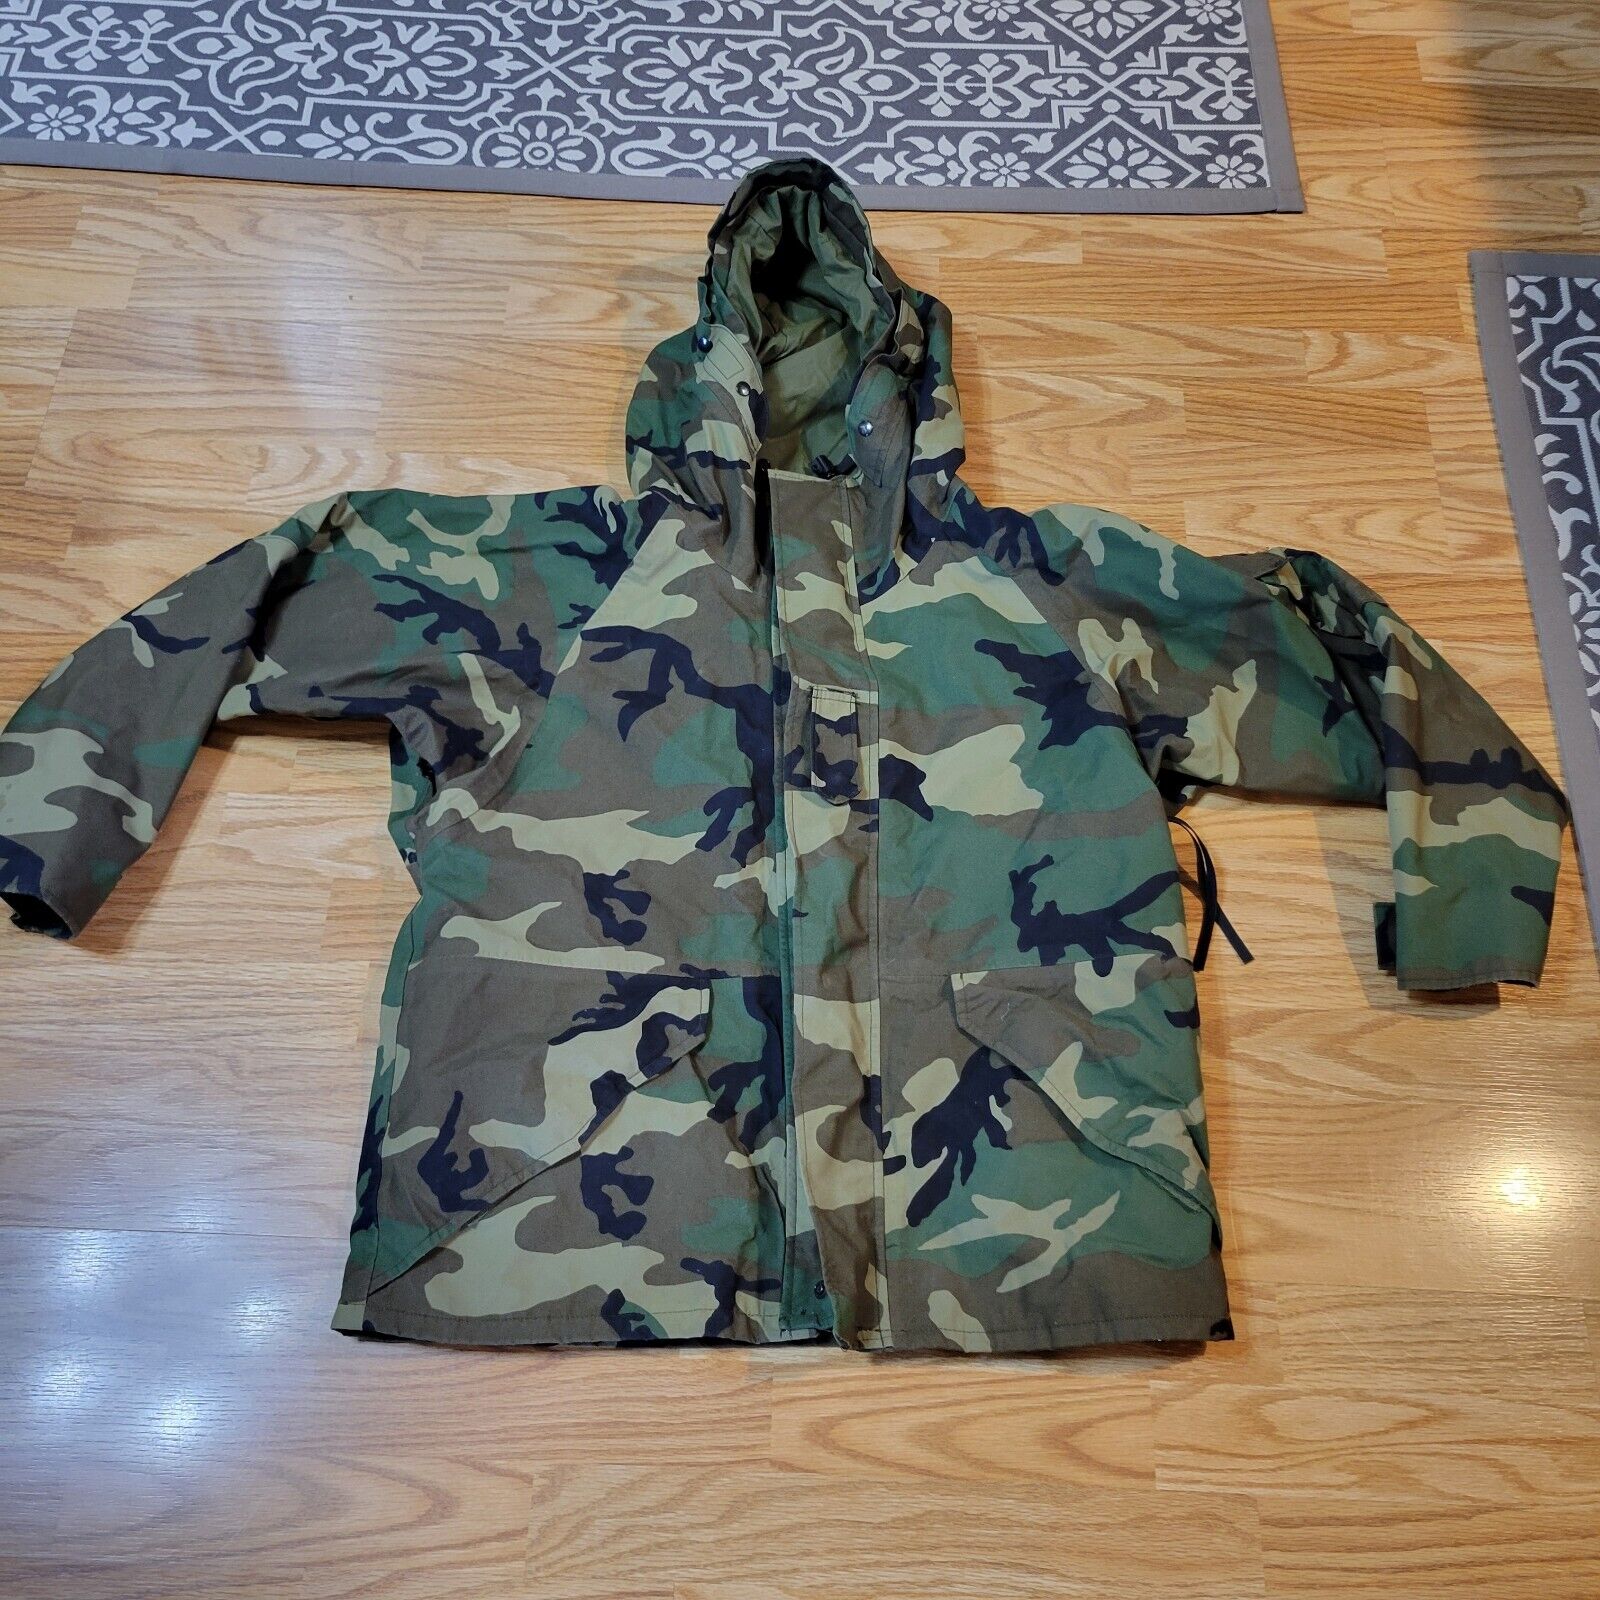 Military Gore-Tex Parka Cold Weather Camouflage Jacket Medium X-Short Lined 